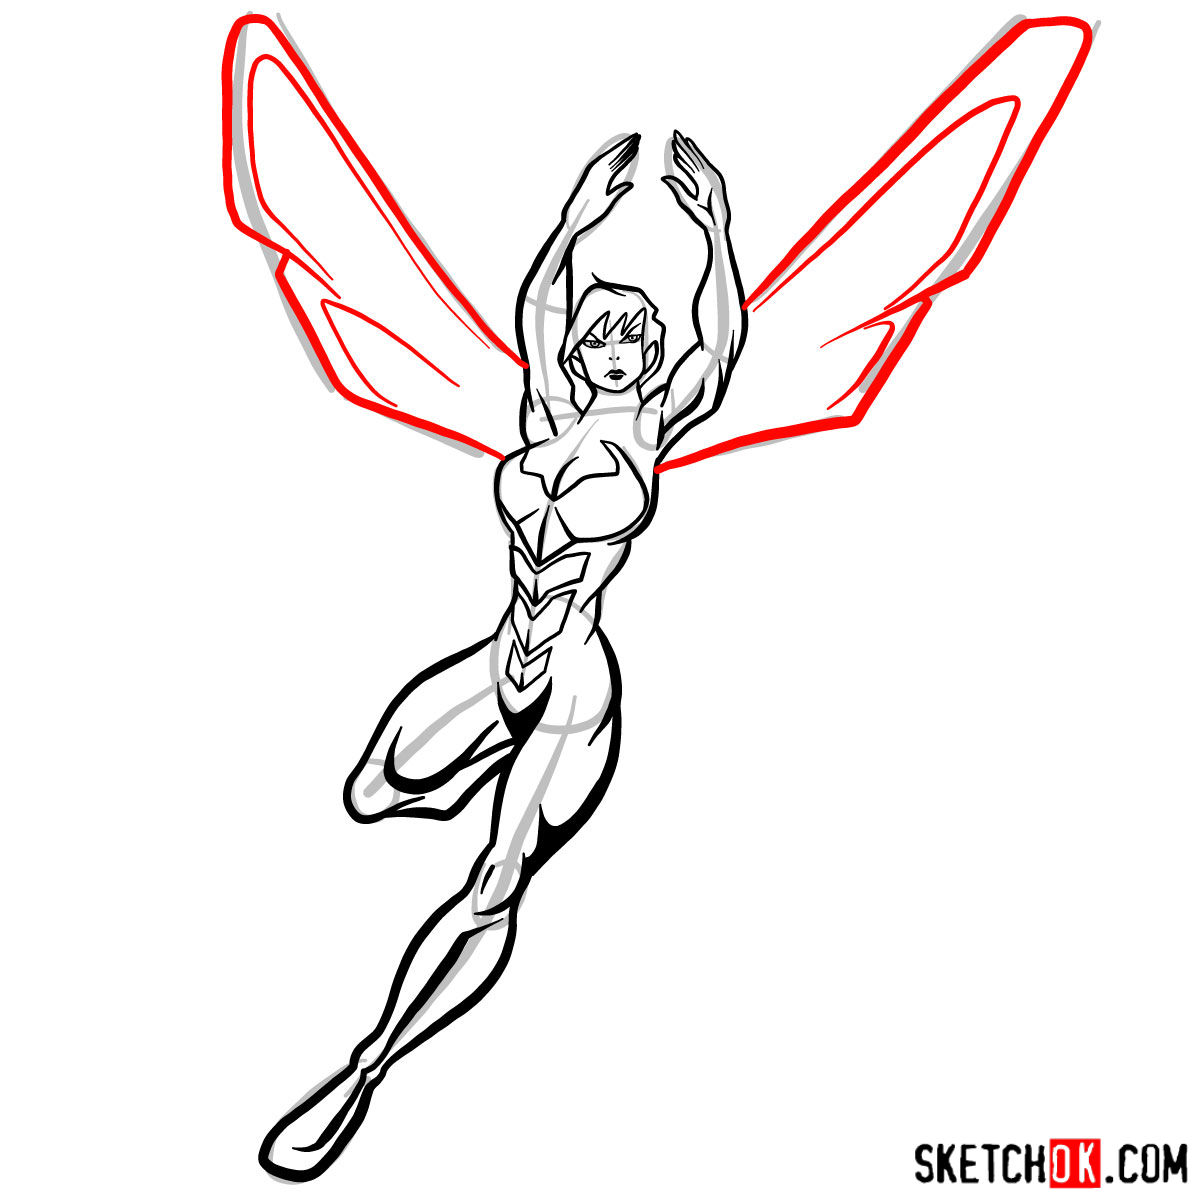 How to draw Wasp, Janet van Dyne from Marvel Comics - step 12